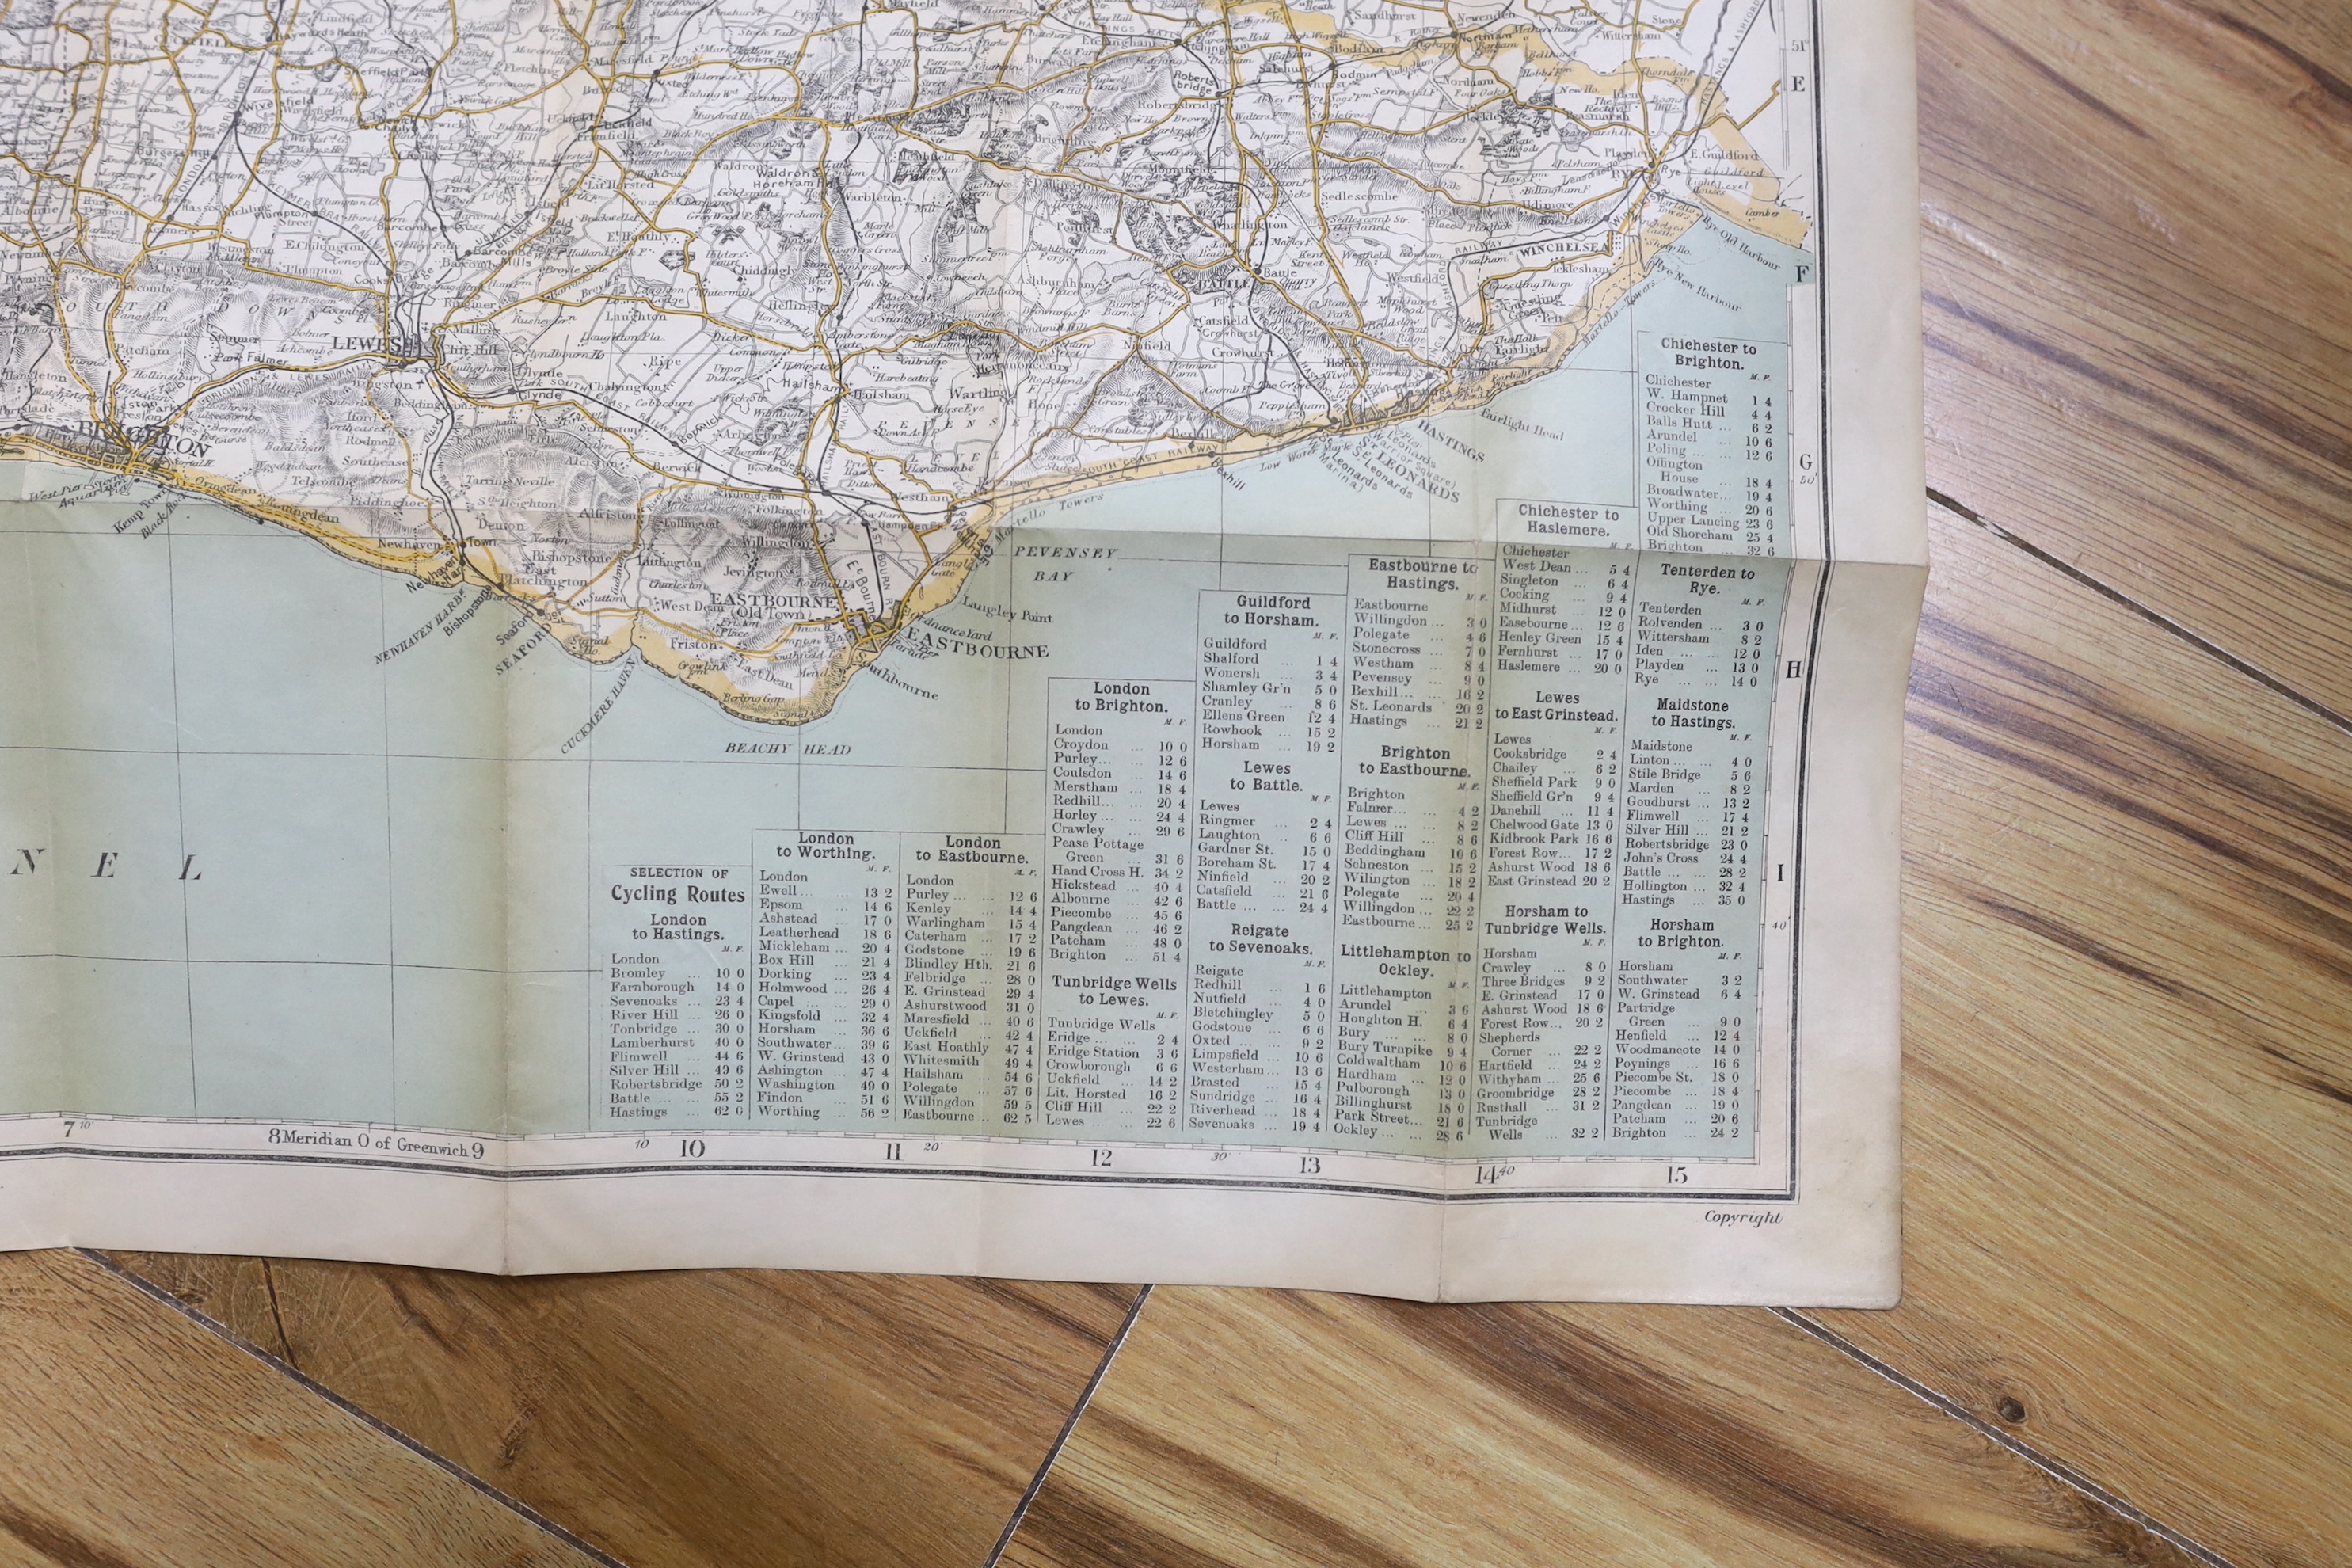 Seven 19th and 20th century folding maps of Sussex; a Pocket County Map series, pub. Chapman and Hall, a Cruchley’s County Map, a Gall & Inglis County Map, a Letts Son & Co. map, a Bacon’s County Map, a Bartholomew’s map